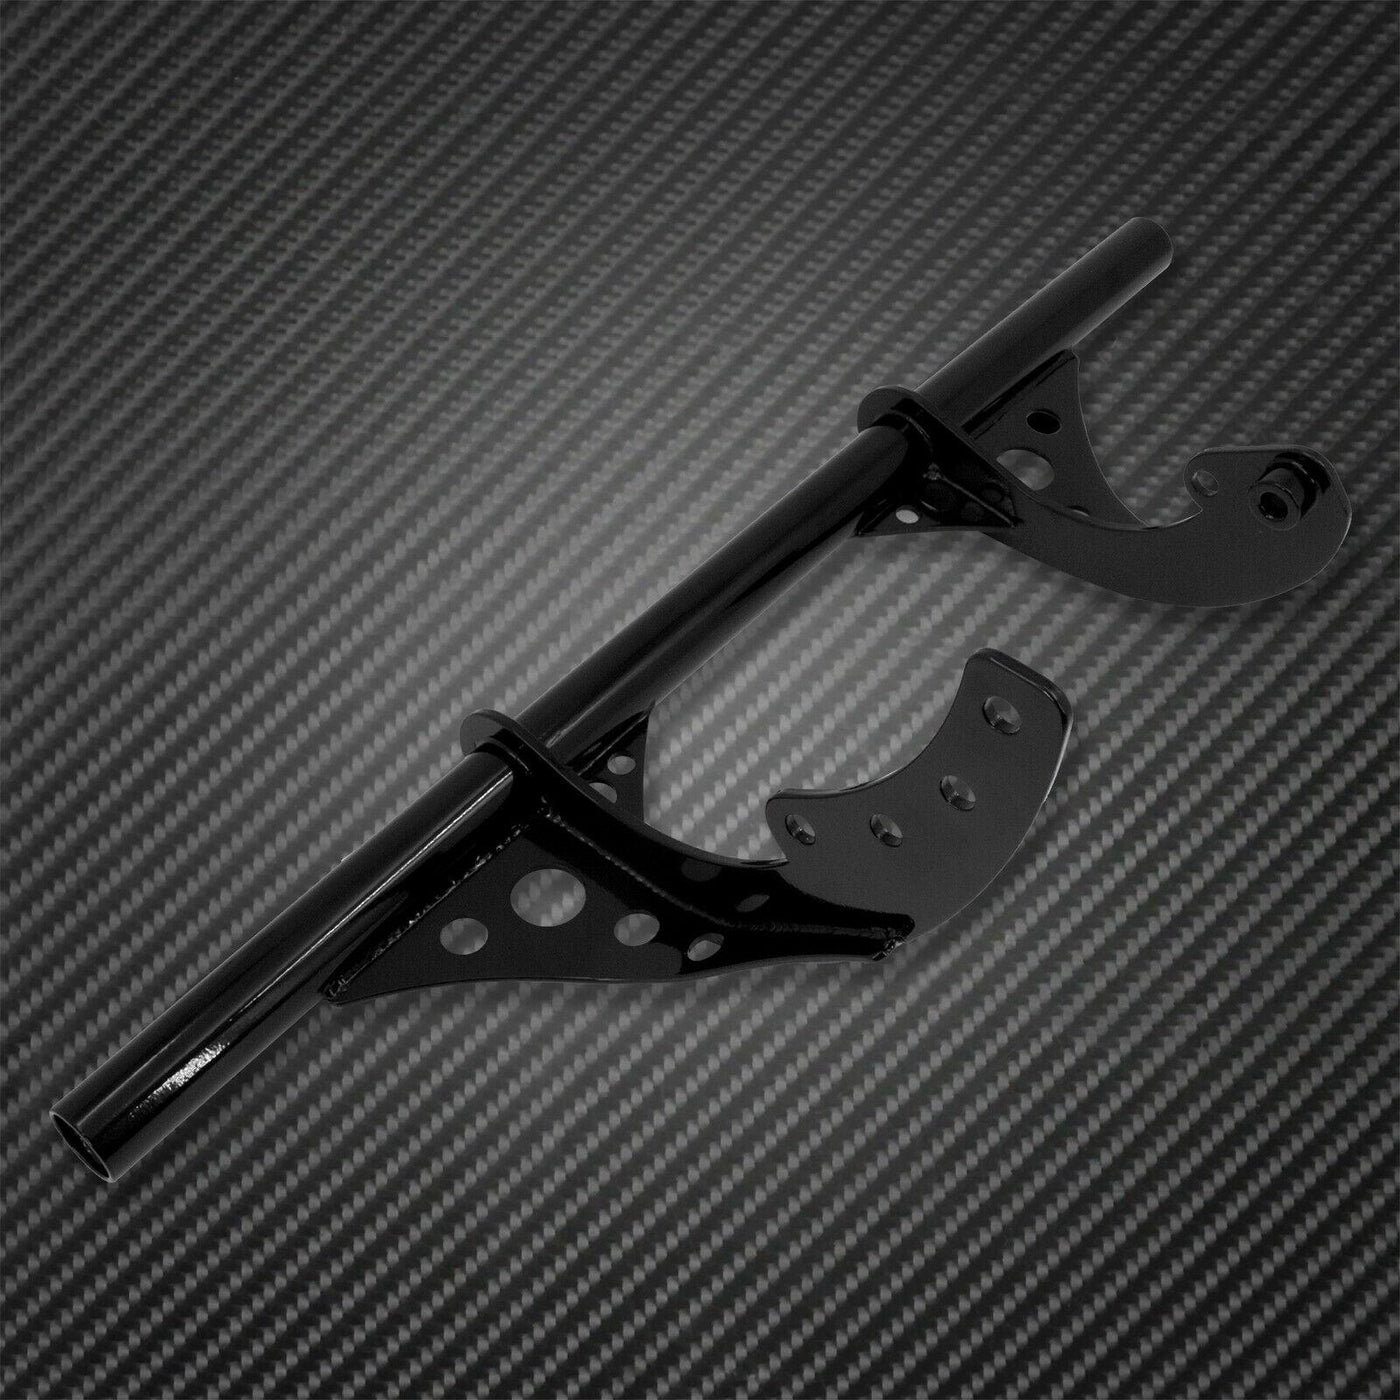 Front Highway Engine Guard Crash Bar Fit For Harley Softail FXLR FXBB 2018-2021 - Moto Life Products